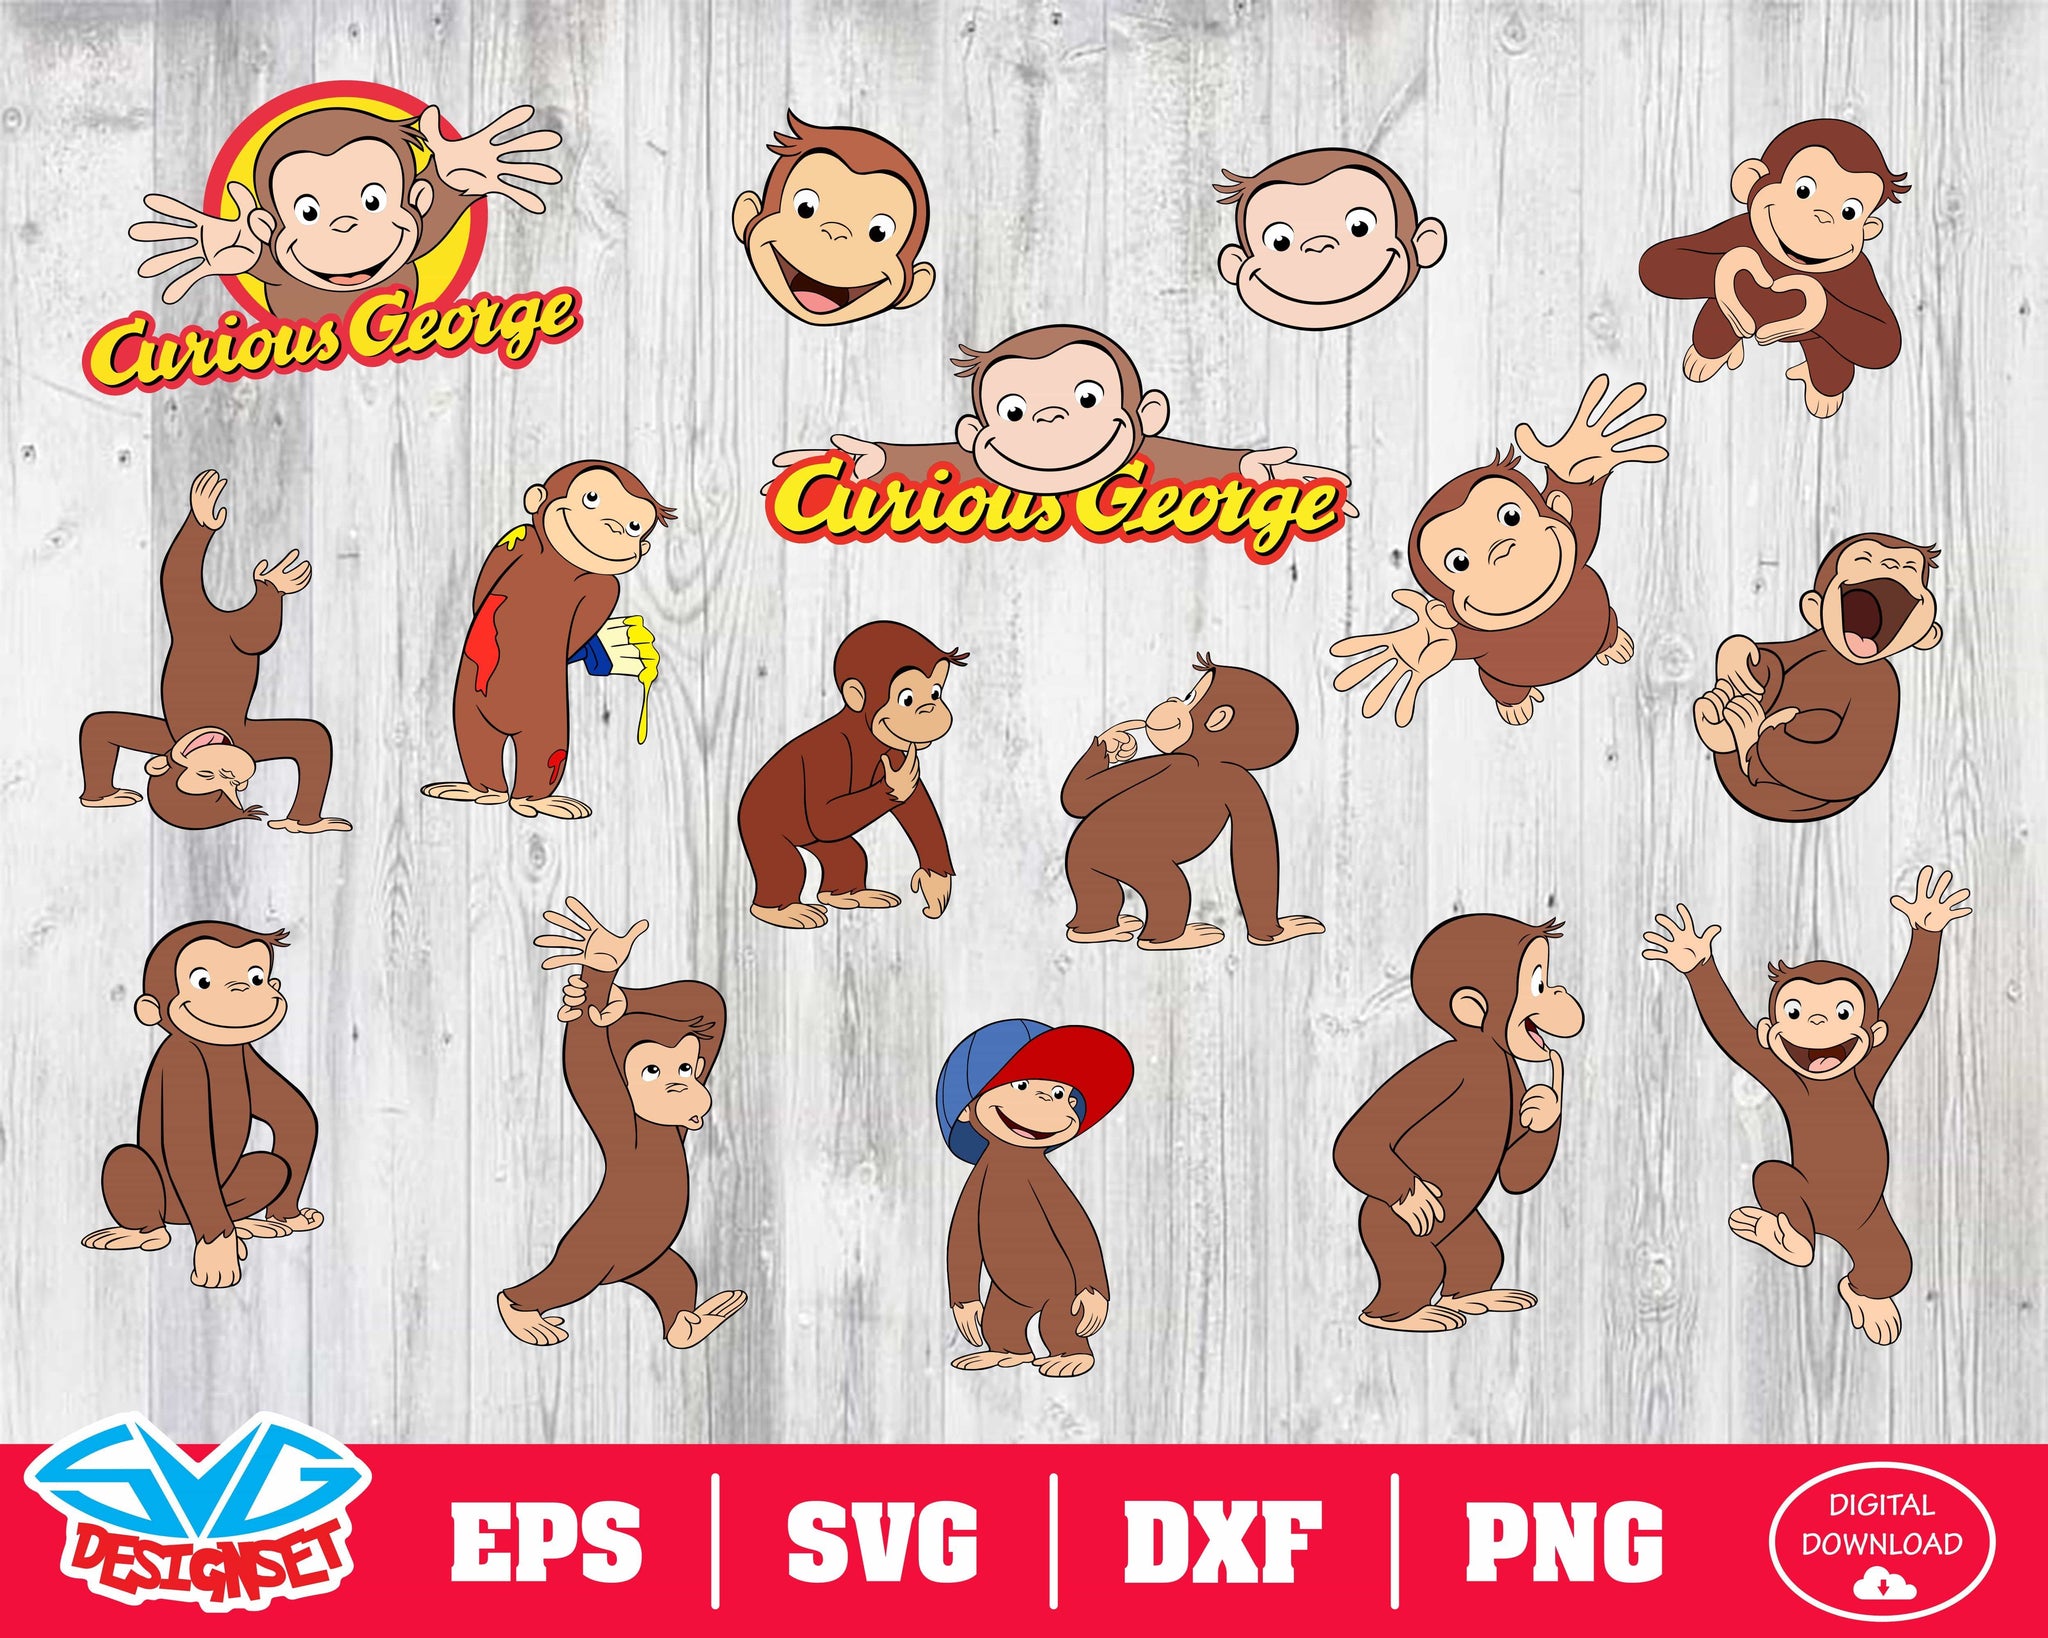 Curious George Svg, Dxf, Eps, Png, Clipart, Silhouette and Cutfiles #1 - SVGDesignSets